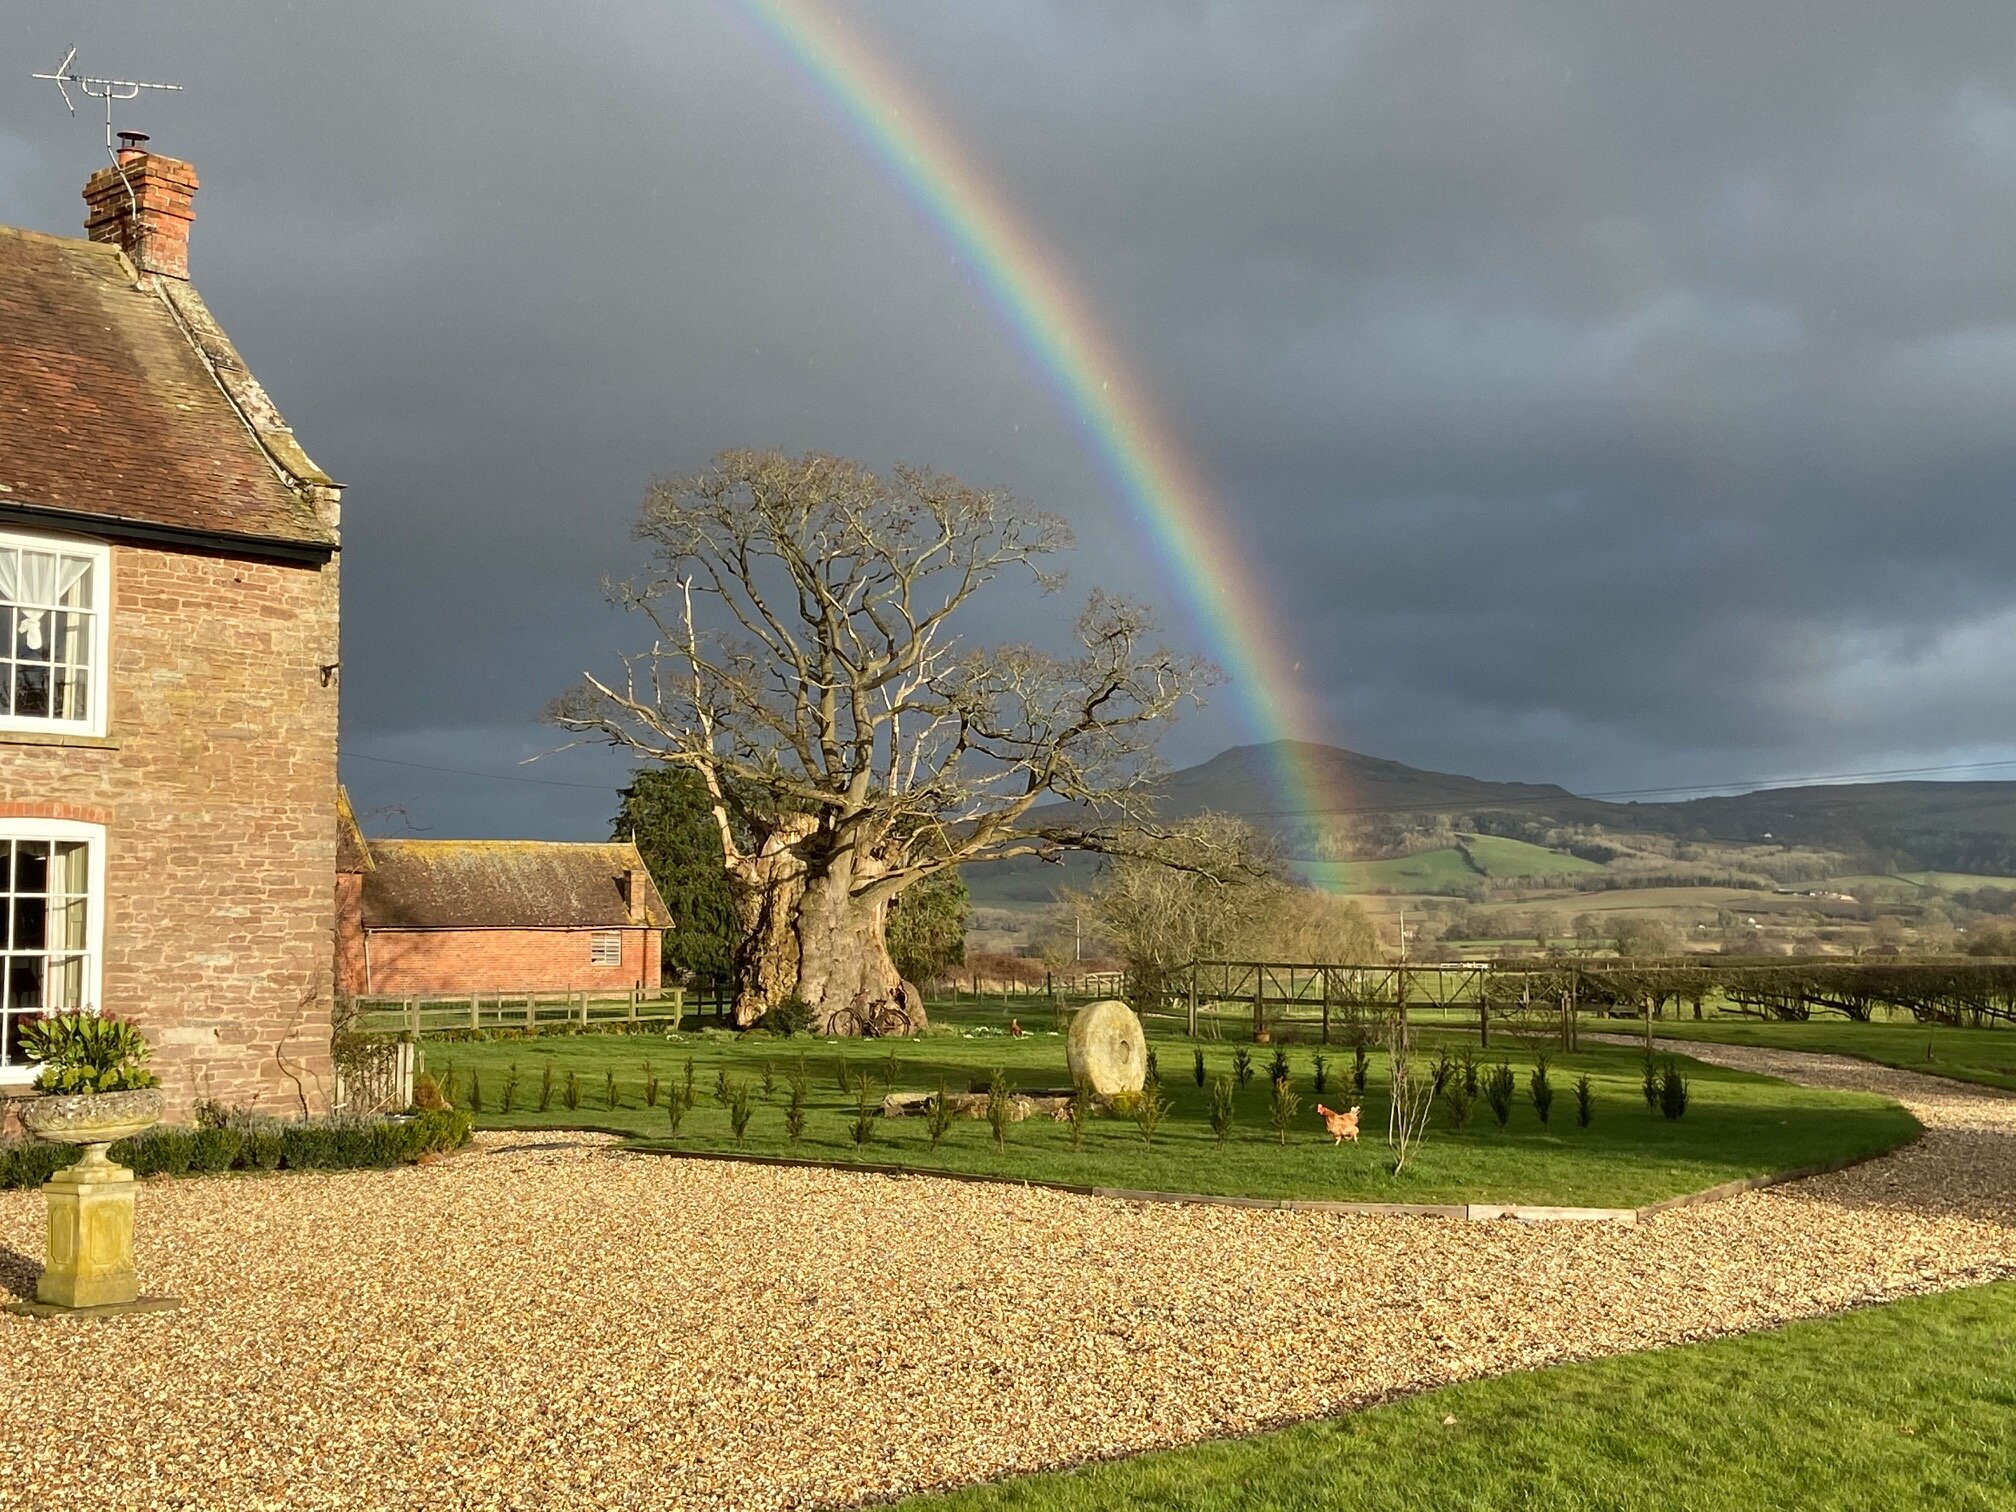 Somewhere over that rainbow lies…the Clee